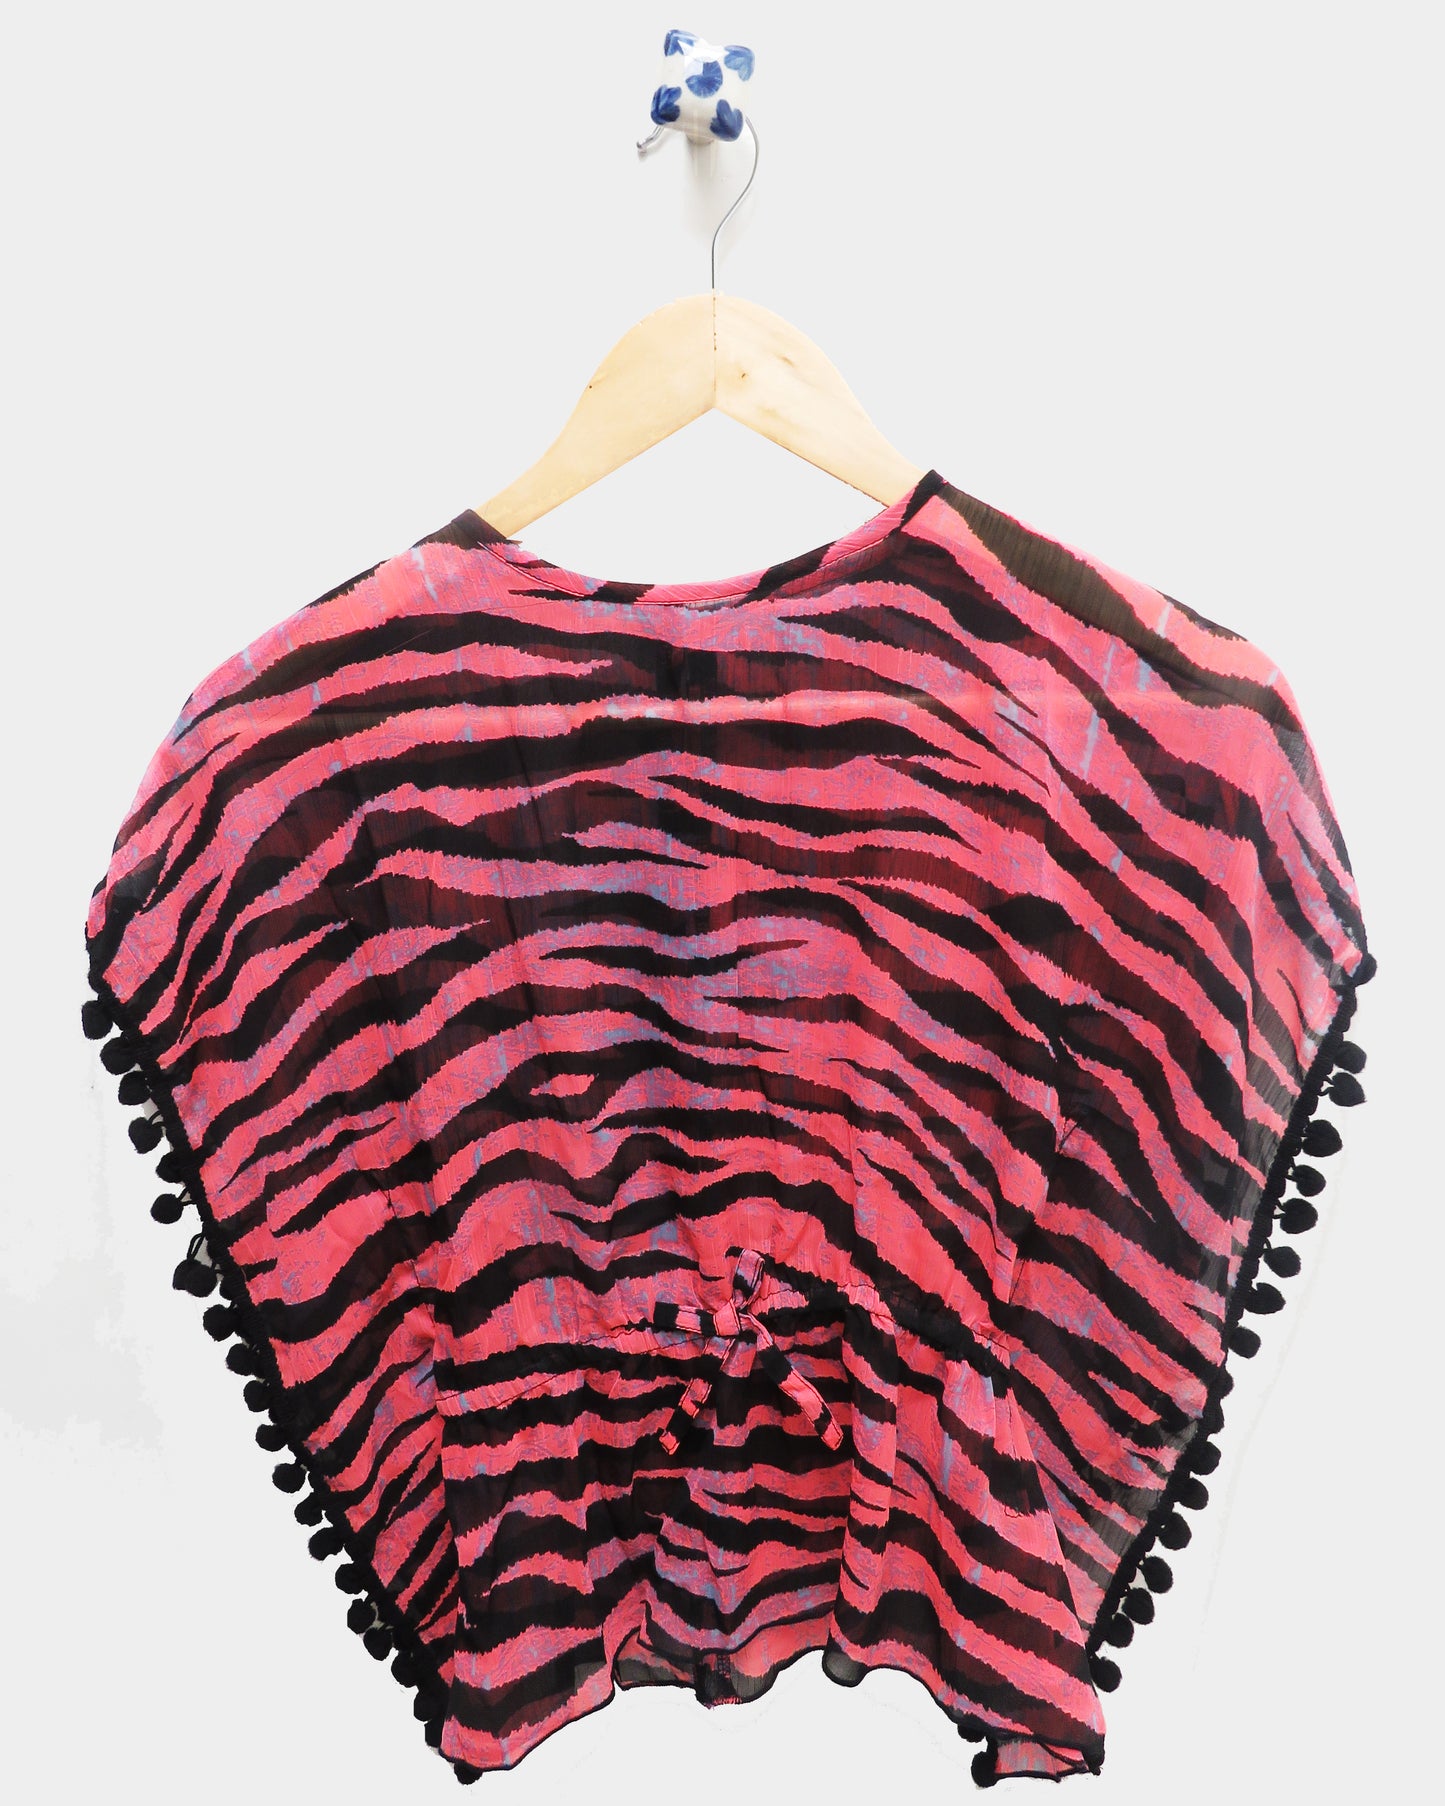 PINK AND BLACK PRINTED KAFTAN WITH POM POM DETAILING,HAS A ROUND NECK,SHORT KAFTAN SLEEVES